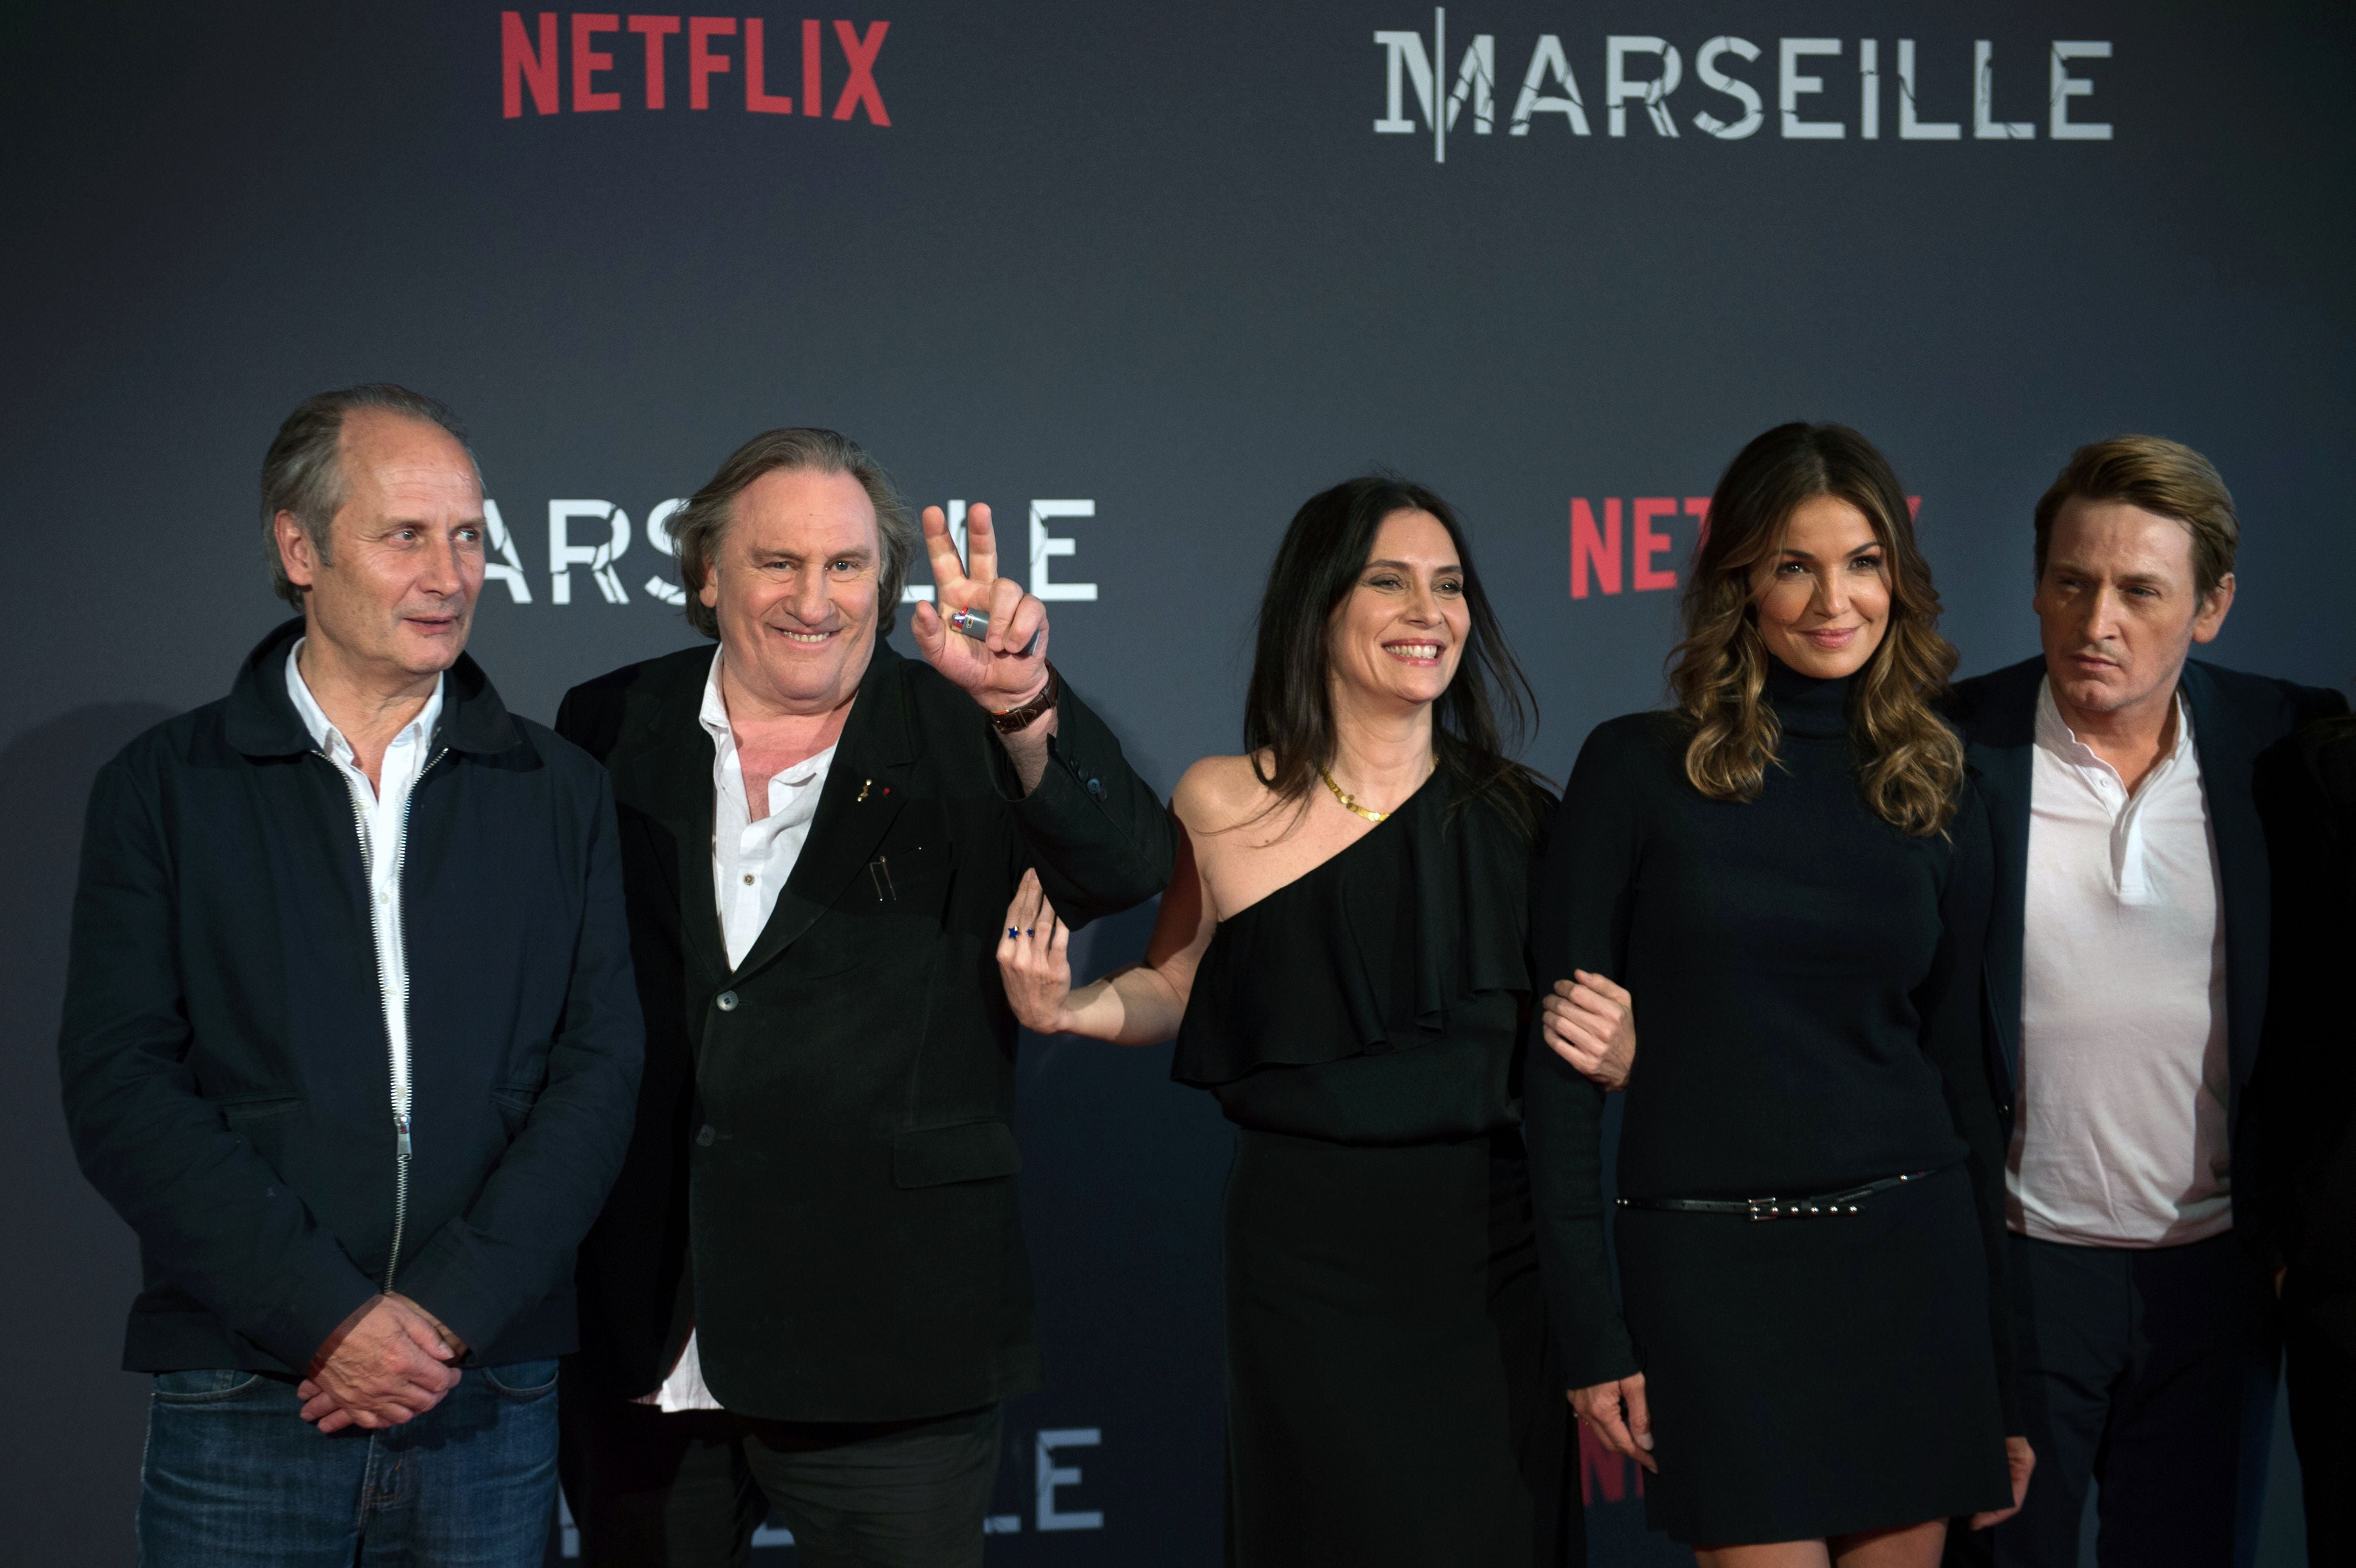 (From L) French actors Hippolyte Girardot, Gerard Depardieu, Geraldine Pailhas, Nadia Fares and Benoit Magimel pose during a photocall for the premiere of the French TV show "Marseille"